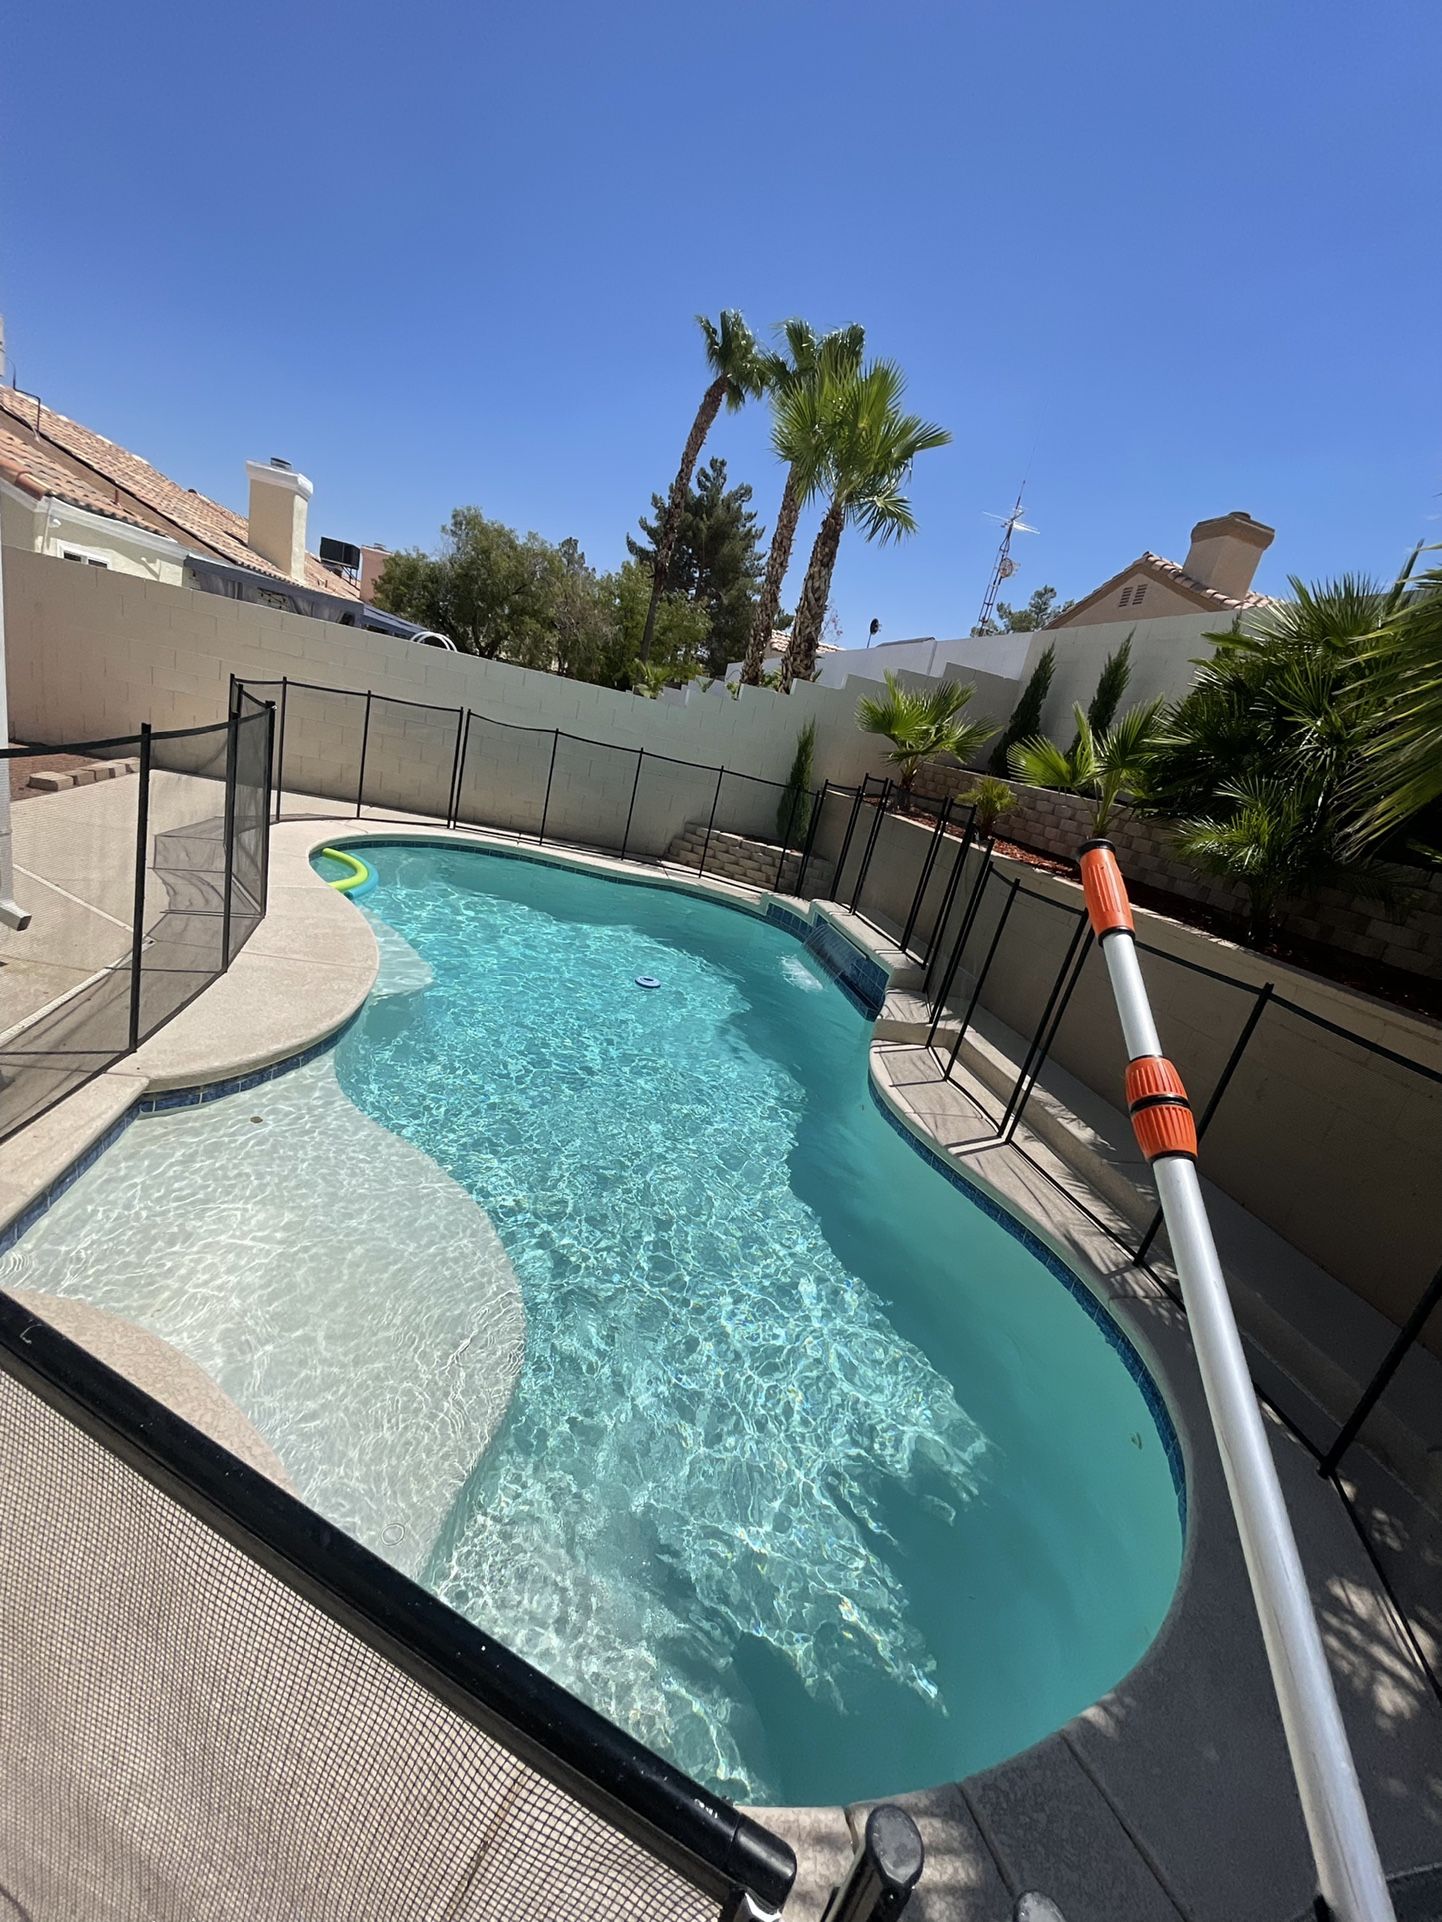 We Offer Pool Services ( All Las Vegas Area )